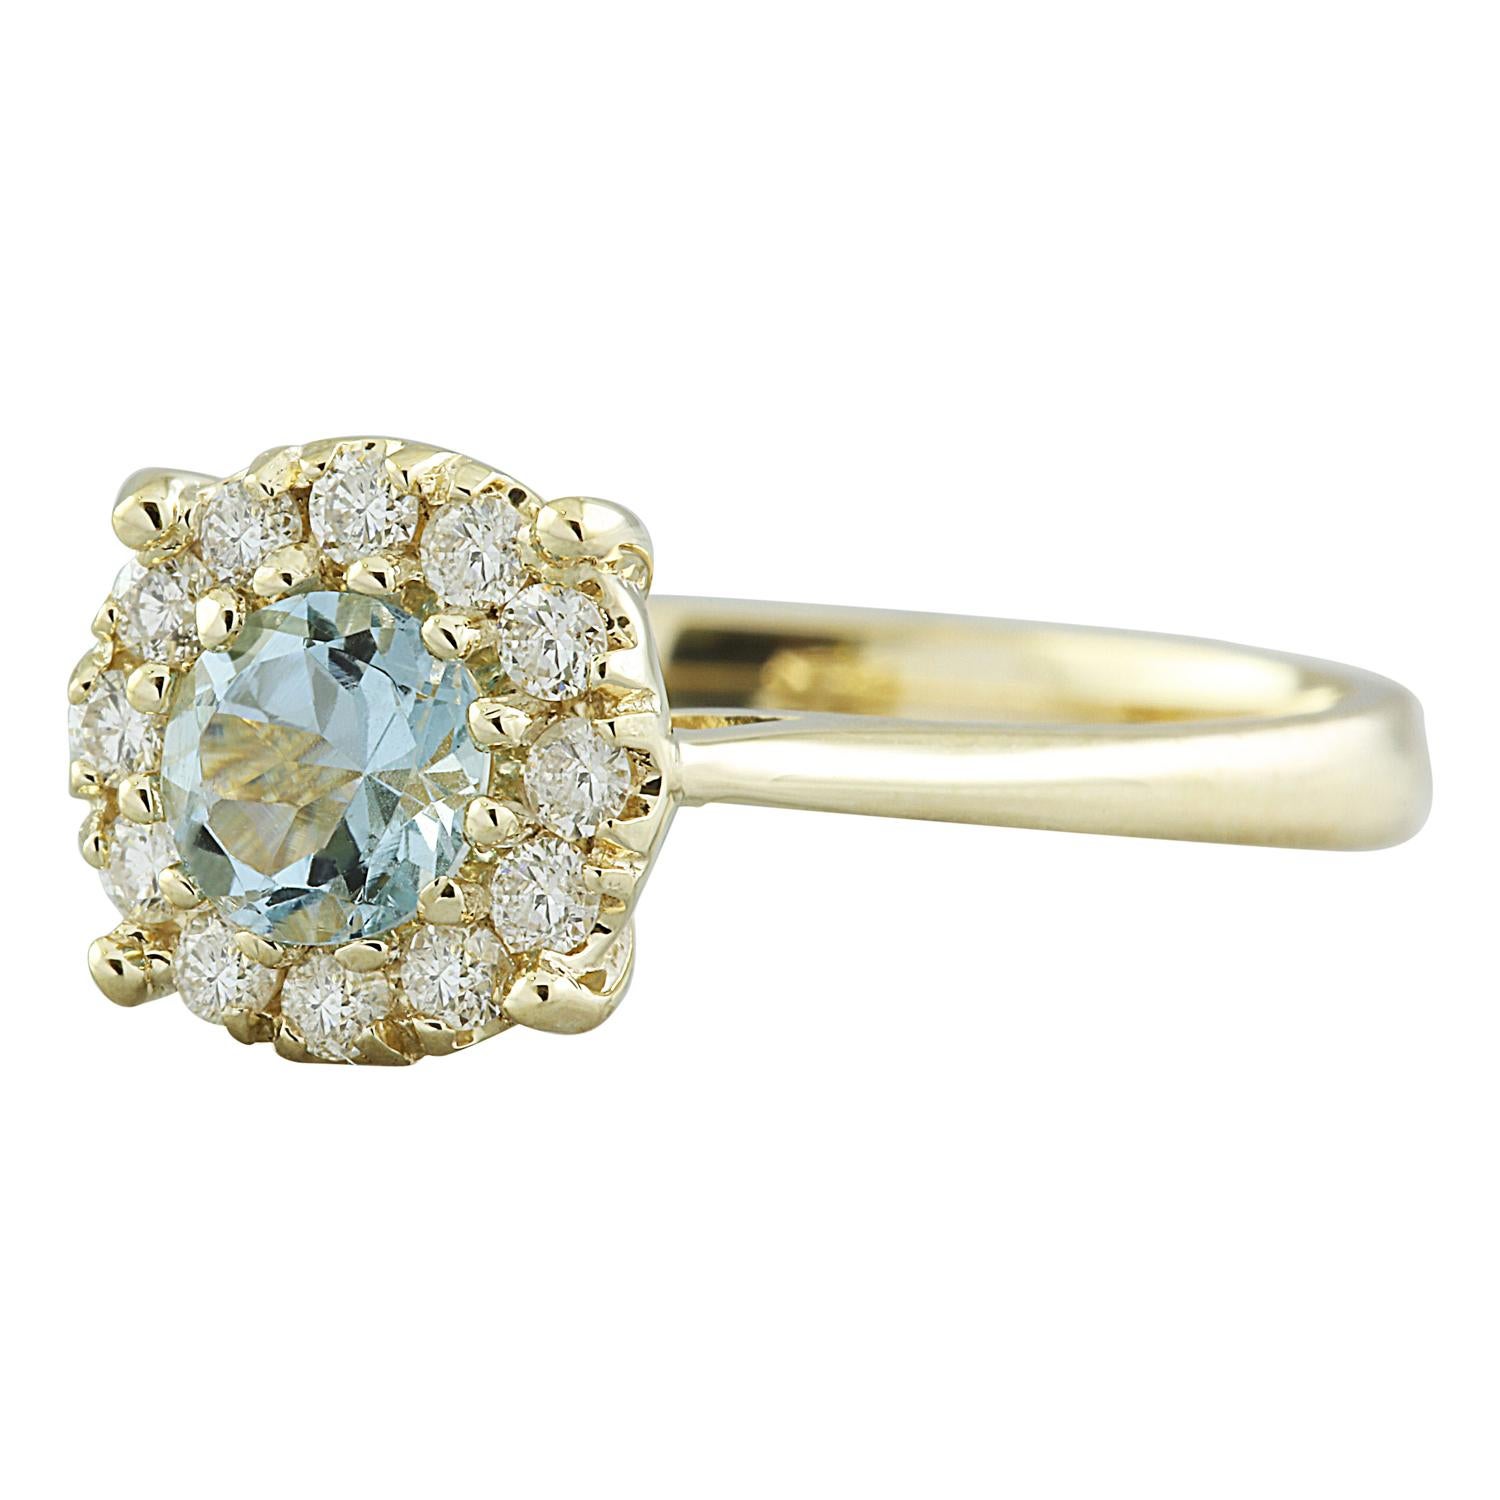 0.72 Carat Natural Aquamarine 14 Karat Solid Yellow Gold Diamond Ring
Stamped: 14K 
Total Ring Weight: 2.9 Grams 
Aquamarine  Weight: 0.50 Carat (5.50x5.50 Millimeters) 
Diamond Weight: 0.22 Carat (F-G Color, VS2-SI1 Clarity )
Quantity: 12
Face